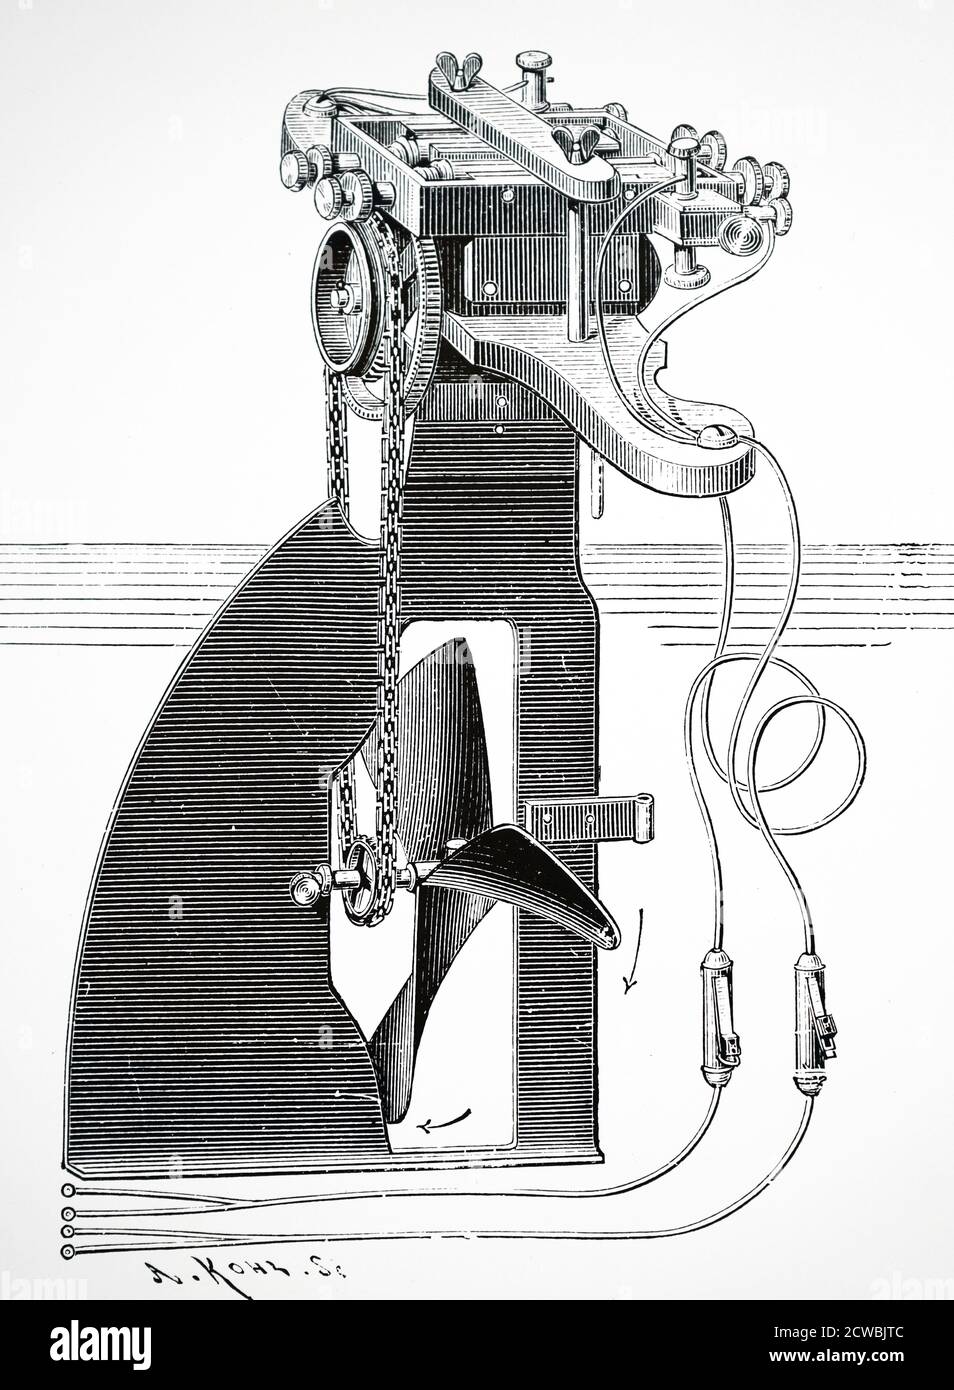 Engraving depicting Gustave Trouve's electric motor used to power the propeller of a launch through a chain drive. Exhibited at the International Exhibition of Electricity , Paris. Stock Photo